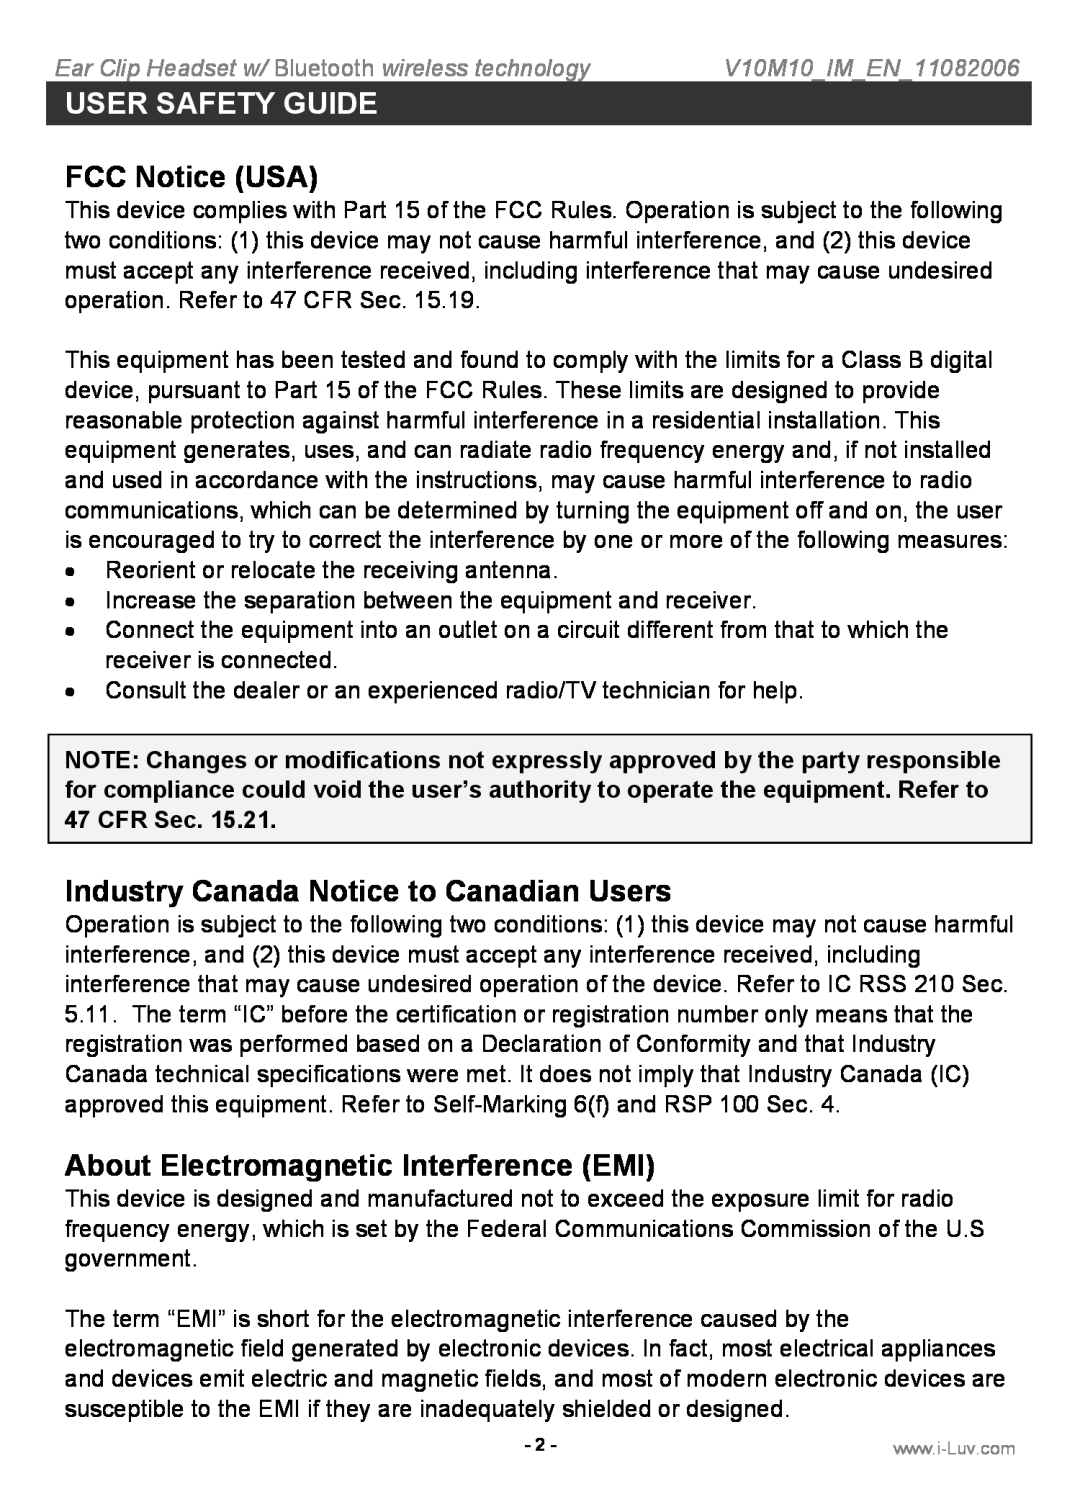 Iluv i202 FCC Notice USA, Industry Canada Notice to Canadian Users, About Electromagnetic Interference EMI 